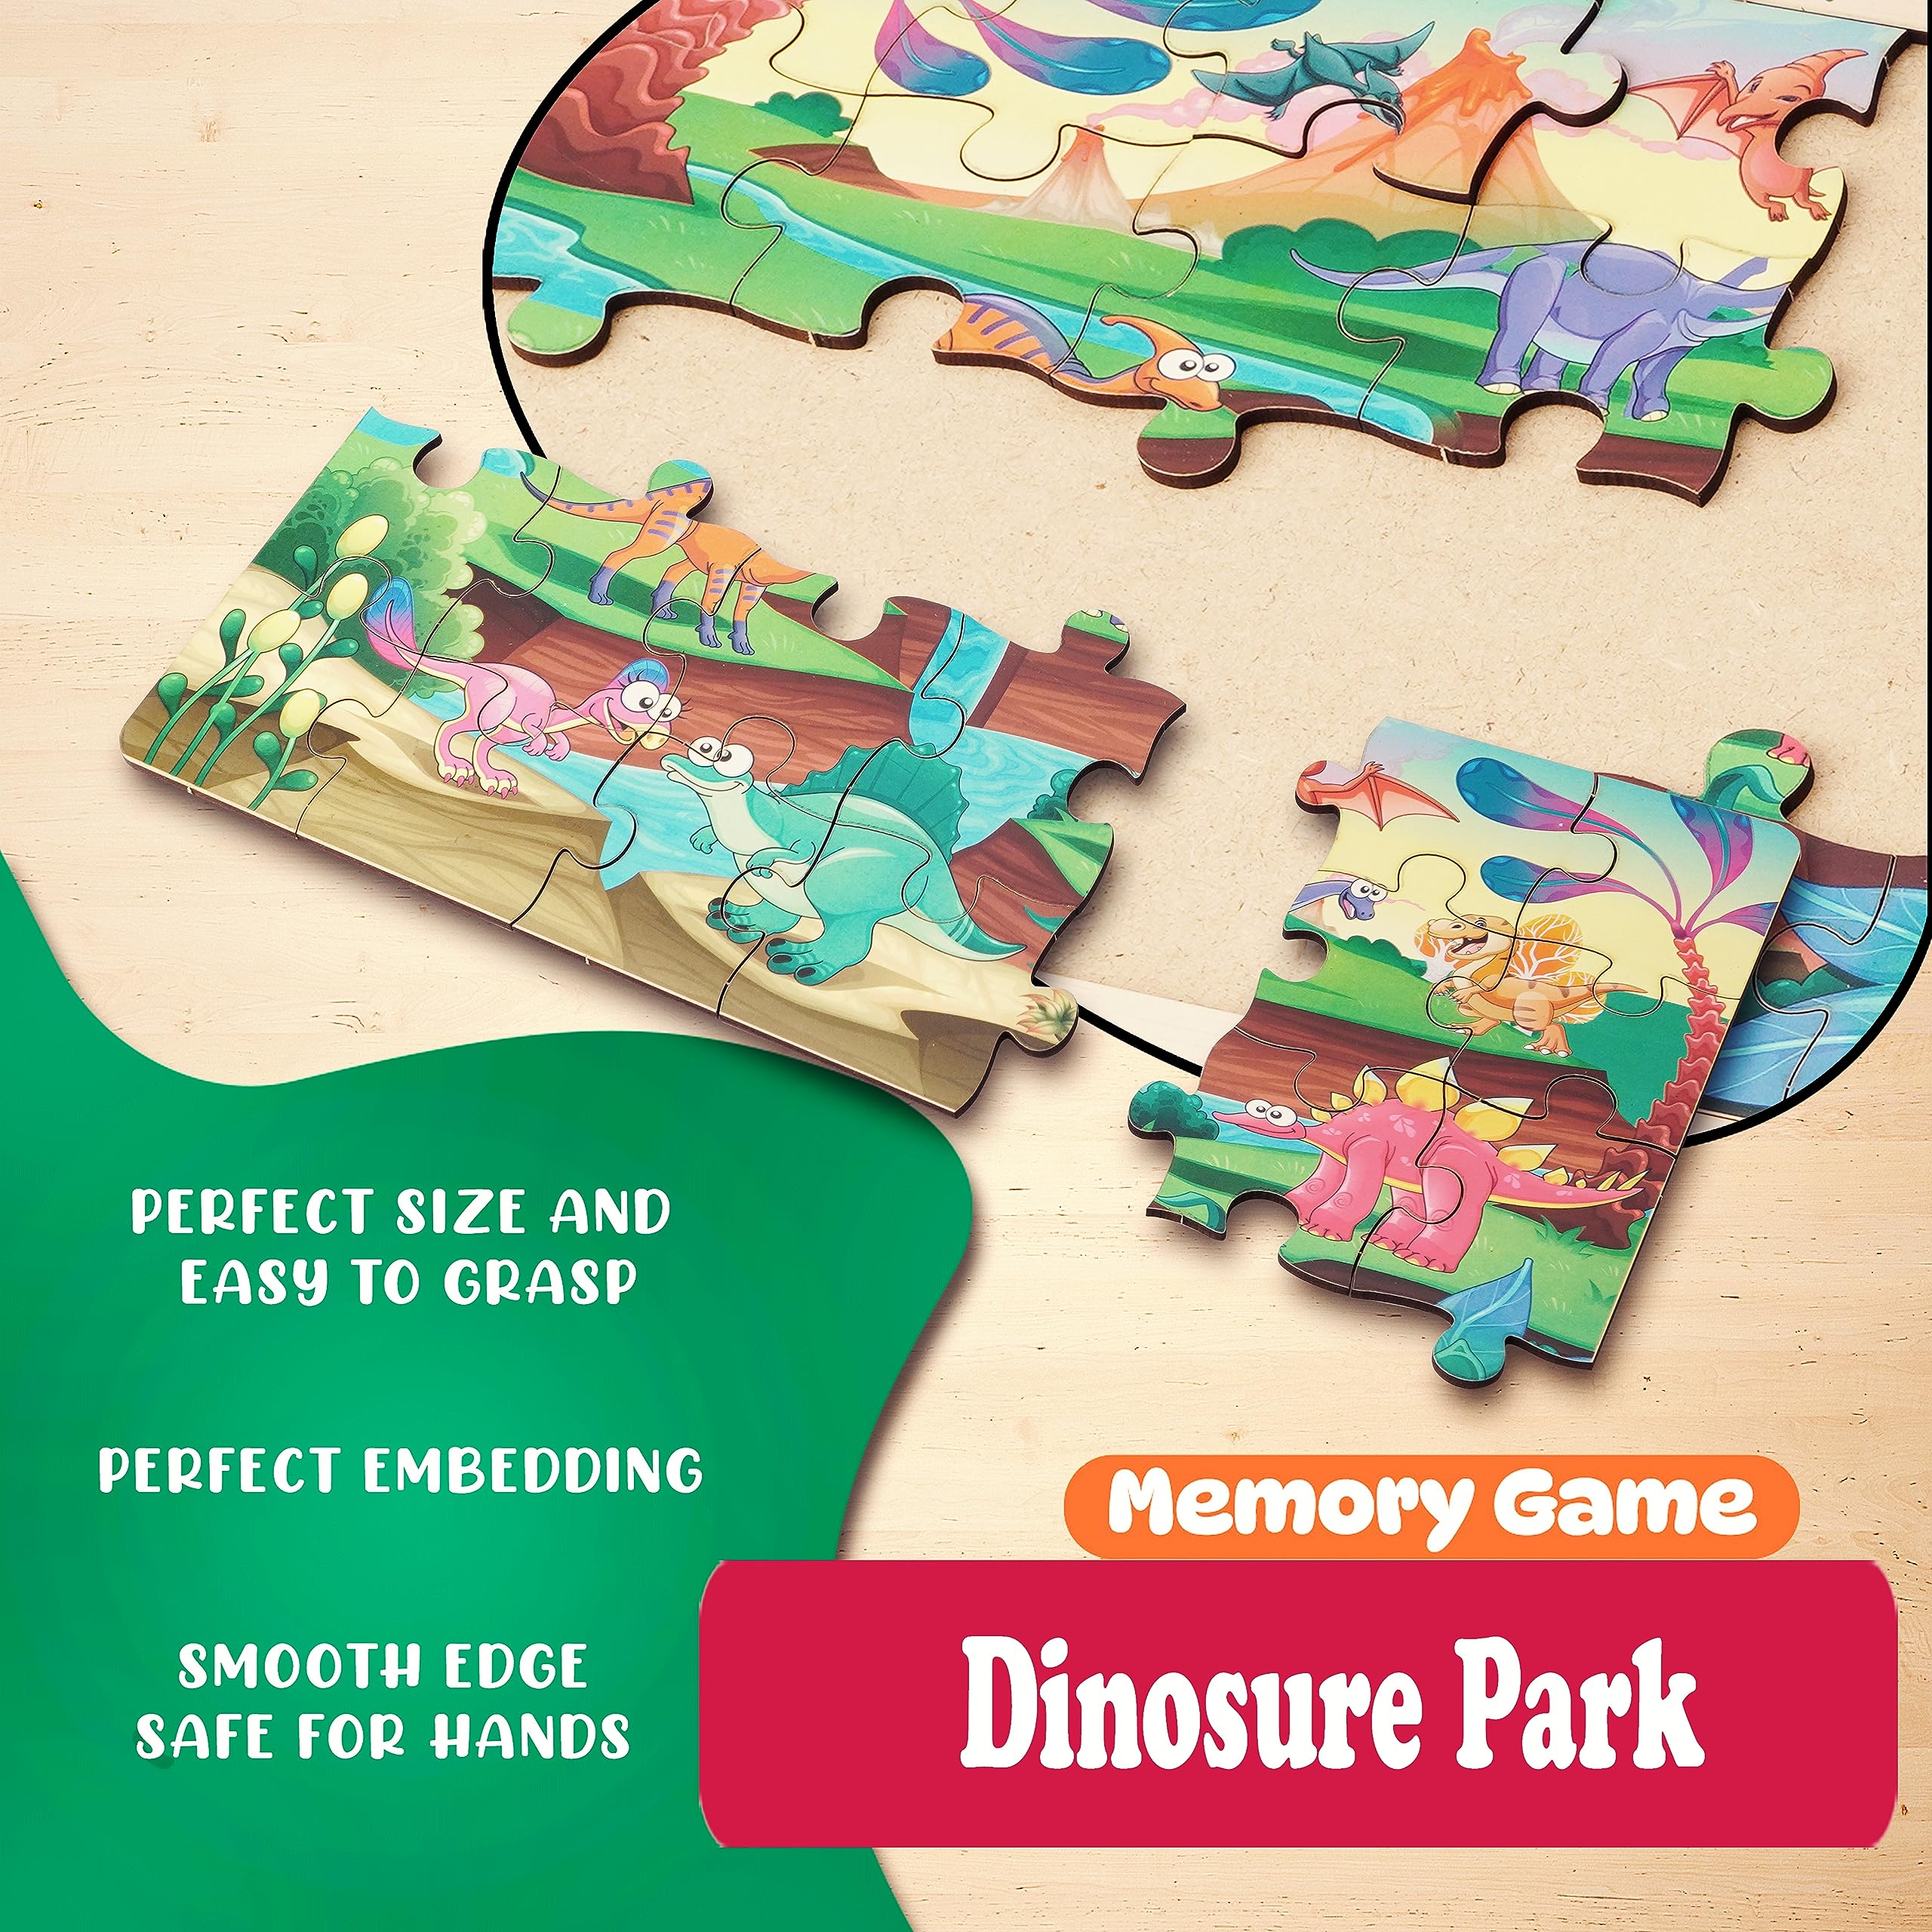 Lefan Wooden Jigsaw Puzzle Dinosure Park Jigsaw Dinosaur Jigsaw Puzzle for Kids of Age 3-5 Years Educational Puzzle Toys Learning Jigsaw Puzzle– 24 Pcs